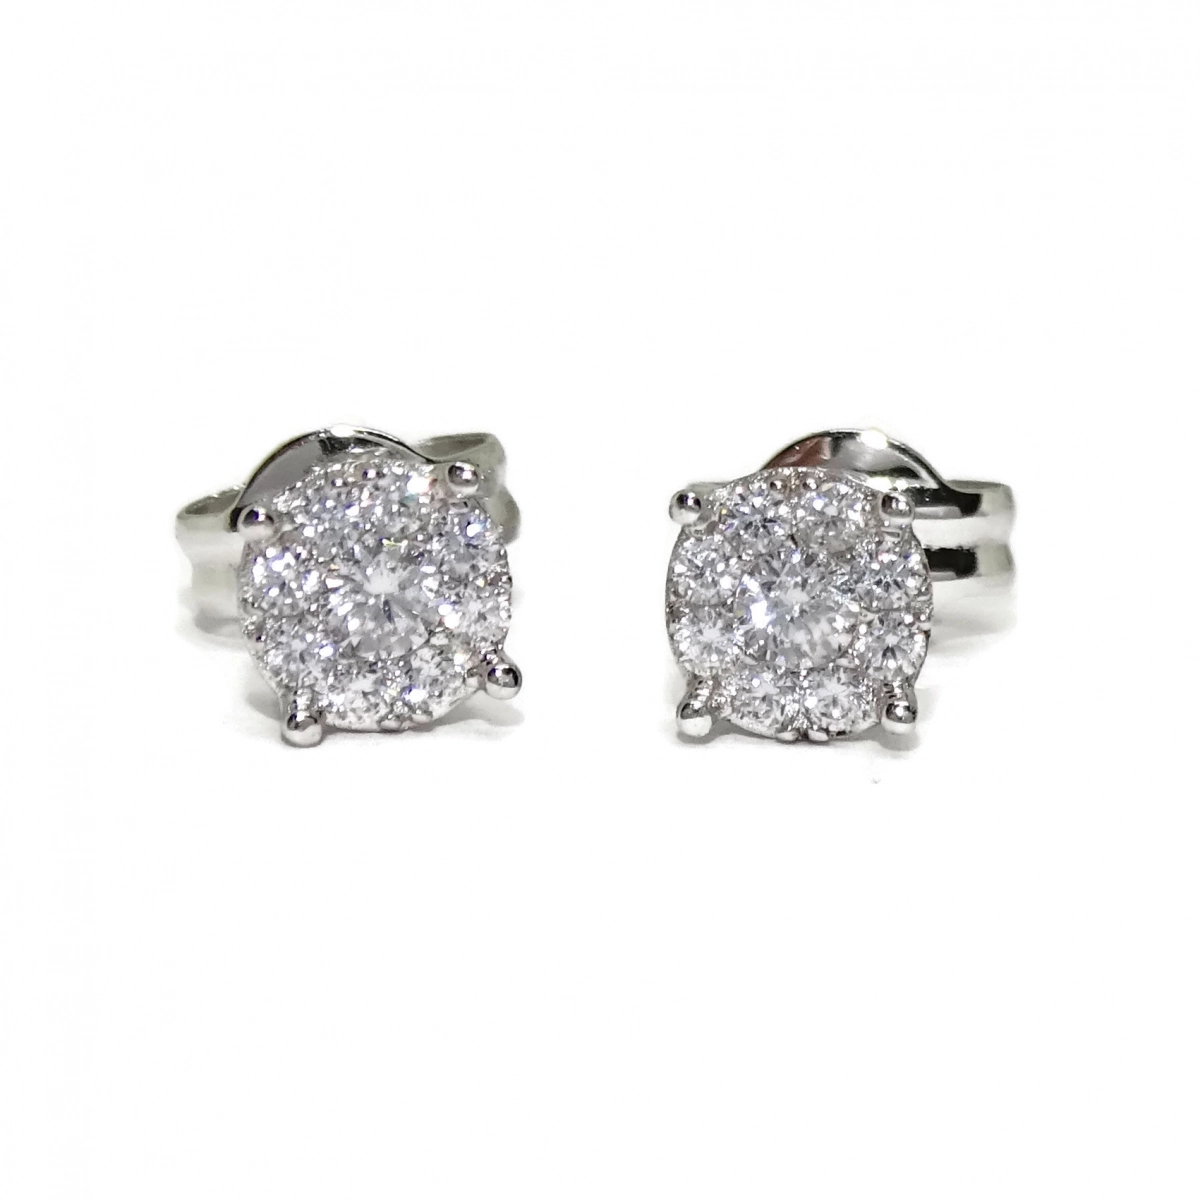 PRECIOUS EARRINGS OF WHITE GOLD OF 18KTES WITH 18 ZIRCONS OF THE BEST QUALITY. NEVER SAY NEVER